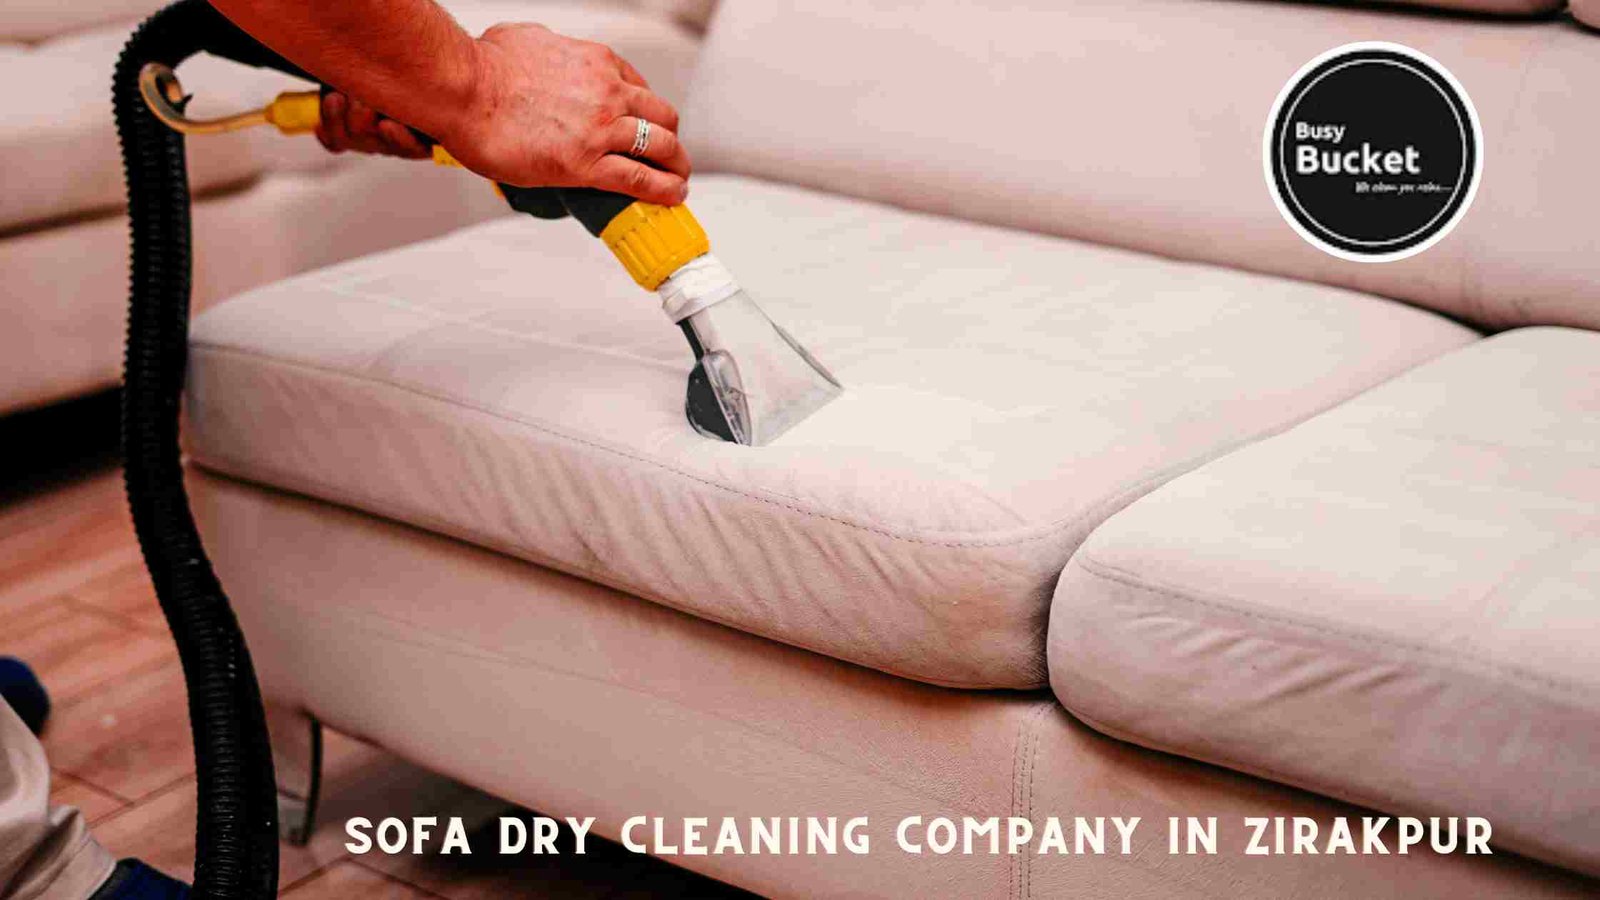 Sofa Dry Cleaning Company in Zirakpur